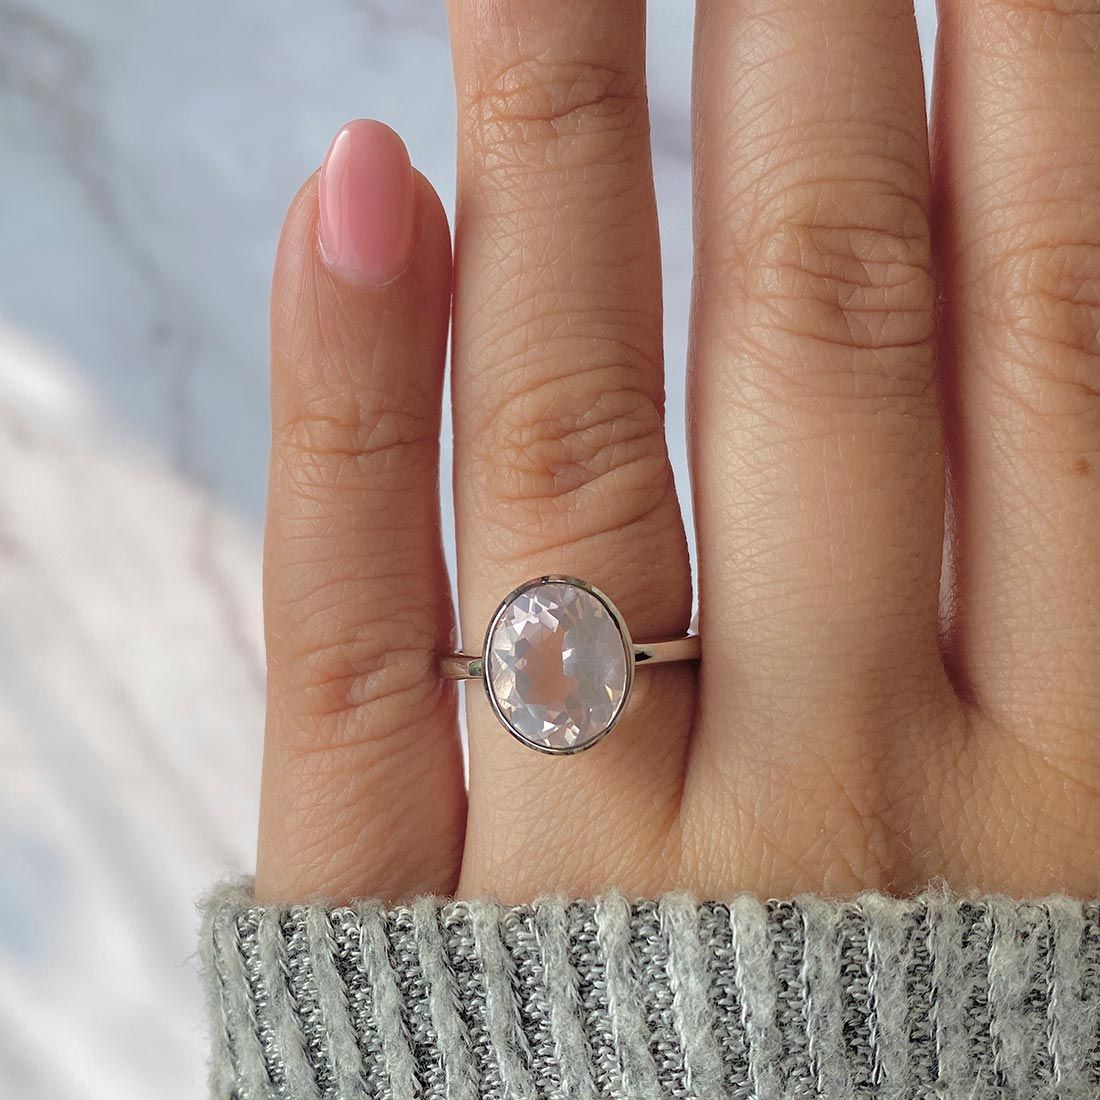 From Classic to Temporary The Rose Quartz Ring